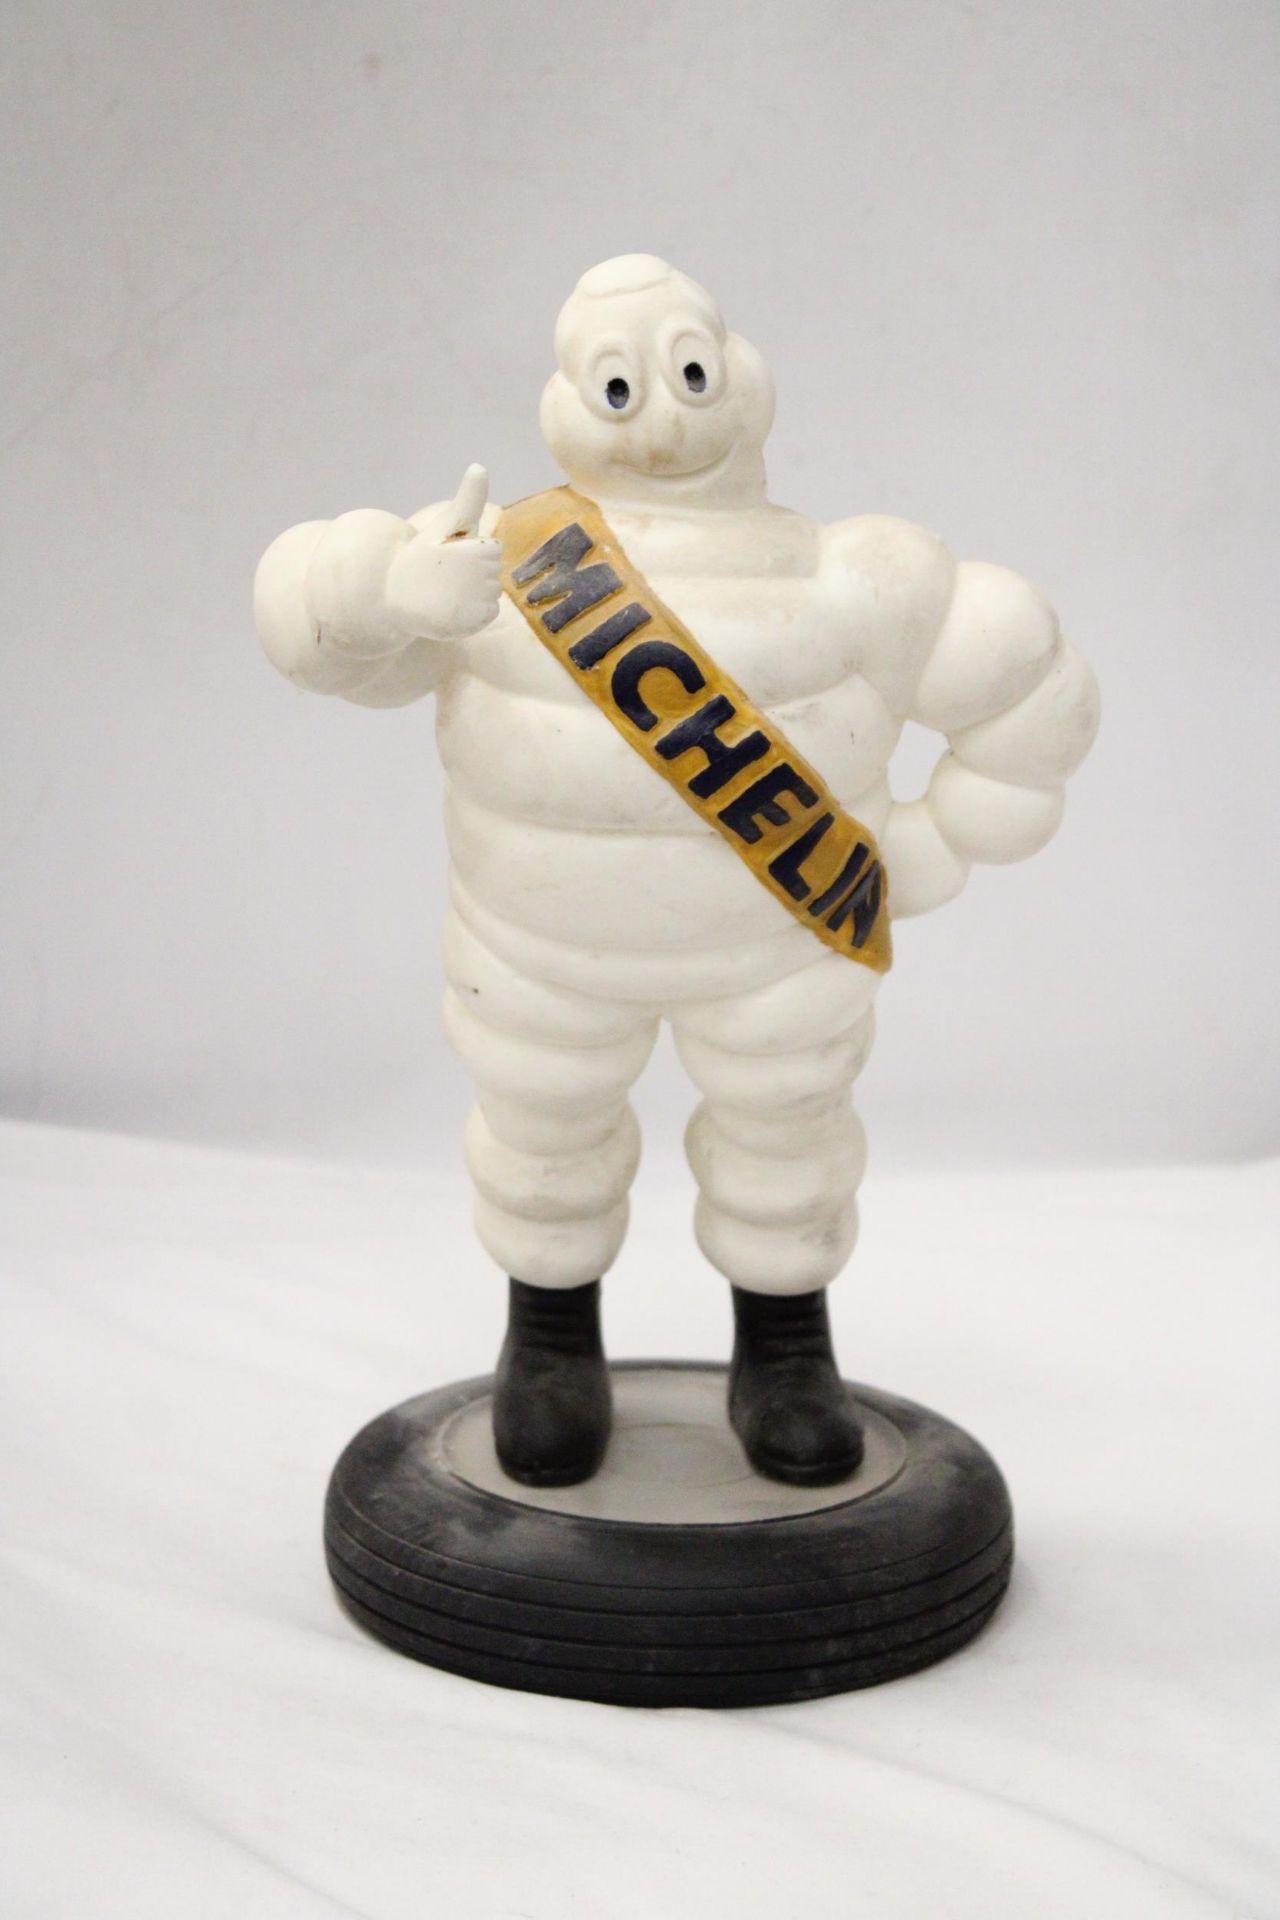 A VINTAGE MICHELIN MAN ON TYRE APPROXIMATELY 33 CM HIGH - Image 2 of 5